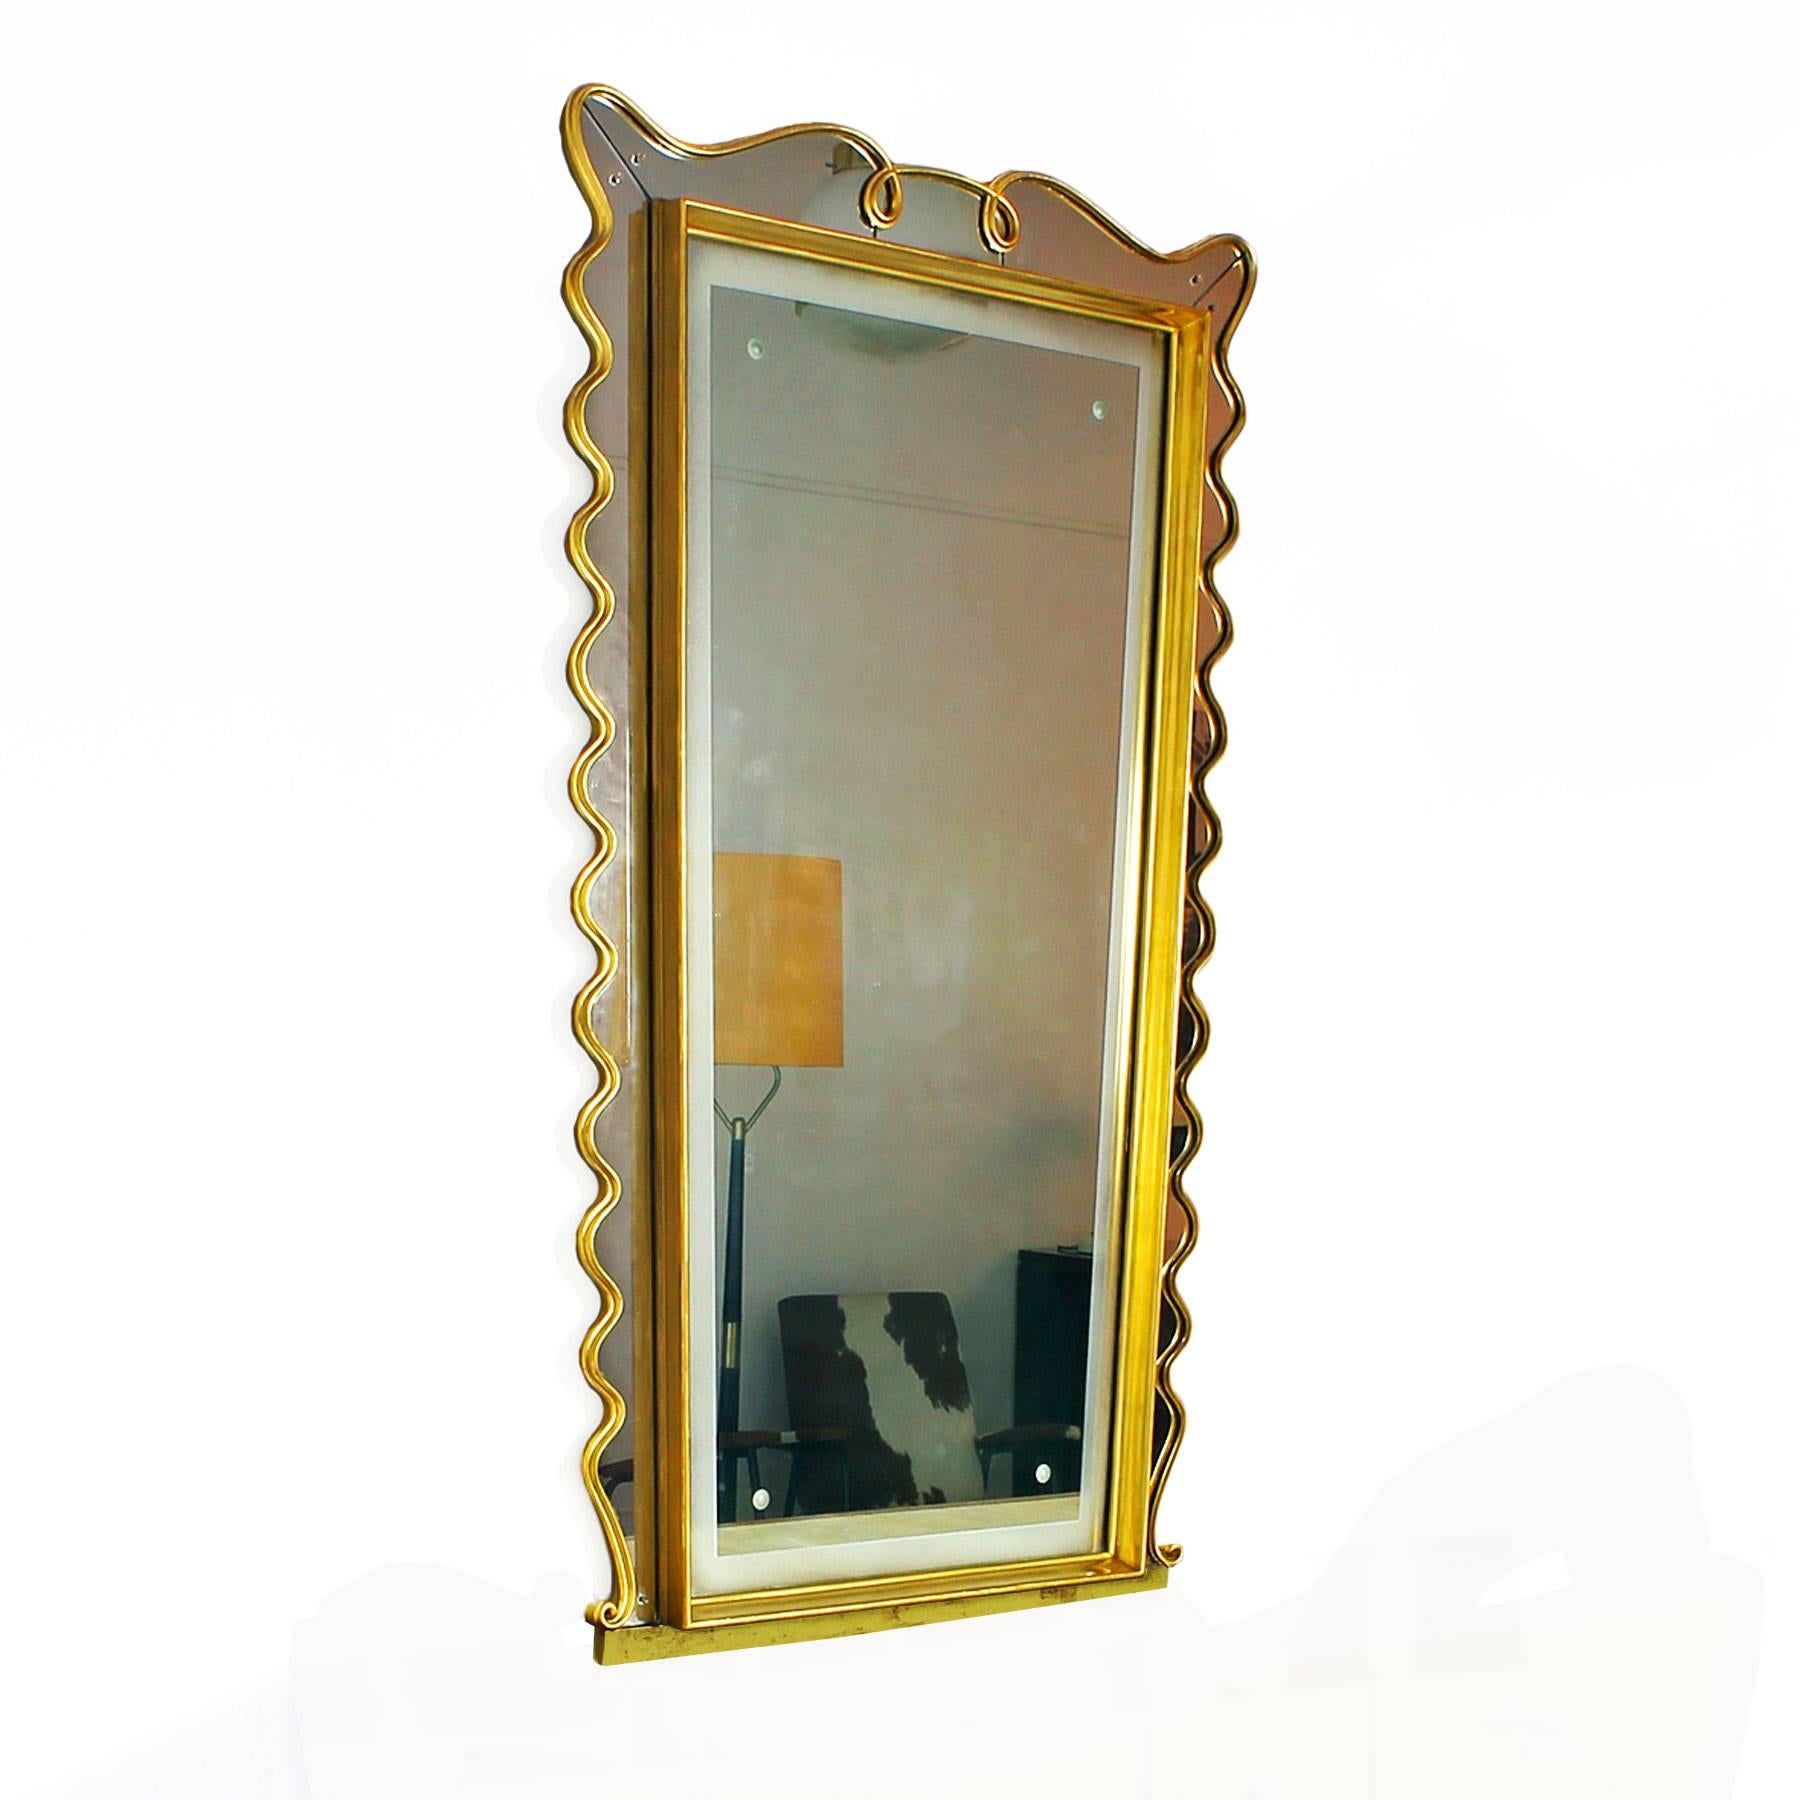 Spectacular original mirror decorated with acid etched circles and strip, golden leaf stucco frame.

Italy, circa 1940.

Measurements:
Width: Top 98 cm - Bottom 85 cm
Depth: 7 cm
Height: 164 cm